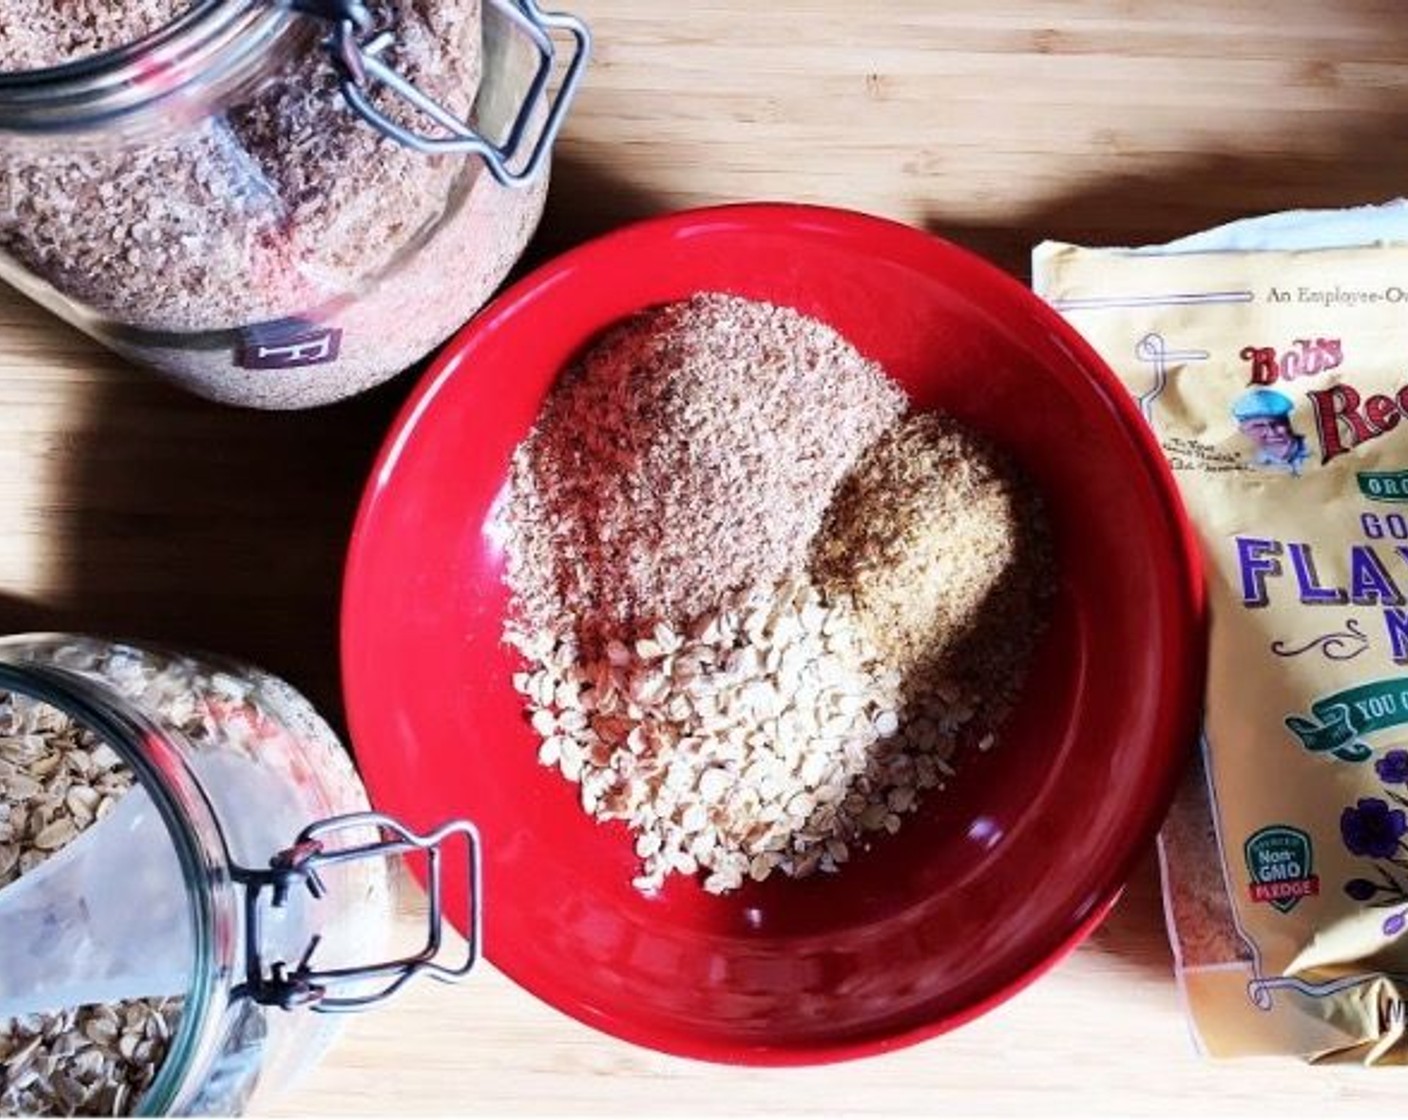 step 1 Into a large bowl, add Old Fashioned Rolled Oats (1/3 cup), Wheat Bran (2 Tbsp), and Ground Flaxseed (1 tsp).